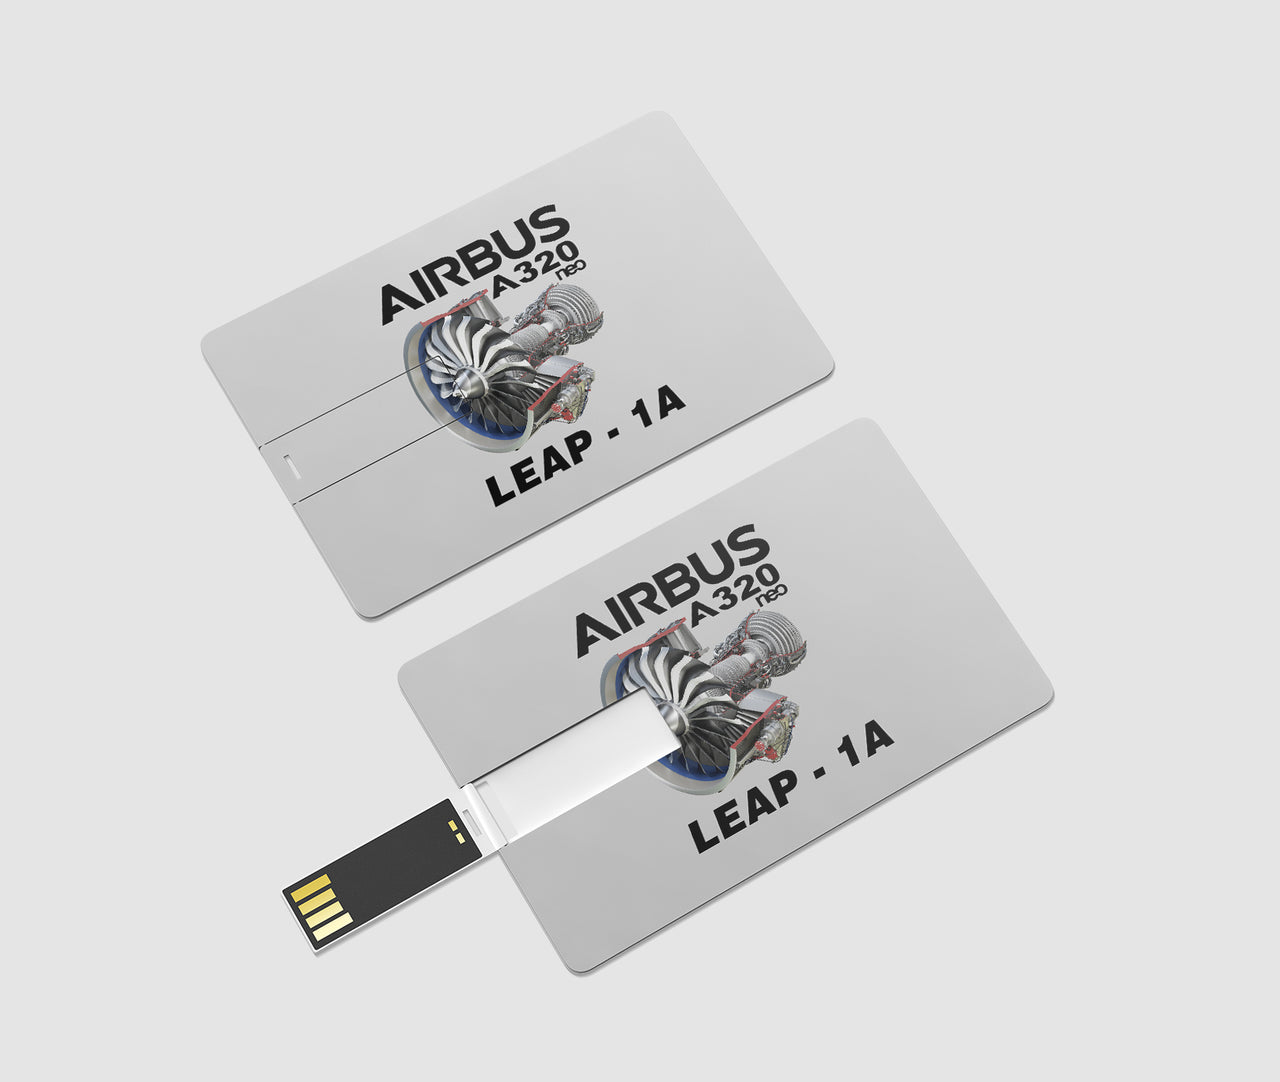 Airbus A320neo & Leap 1A Designed USB Cards